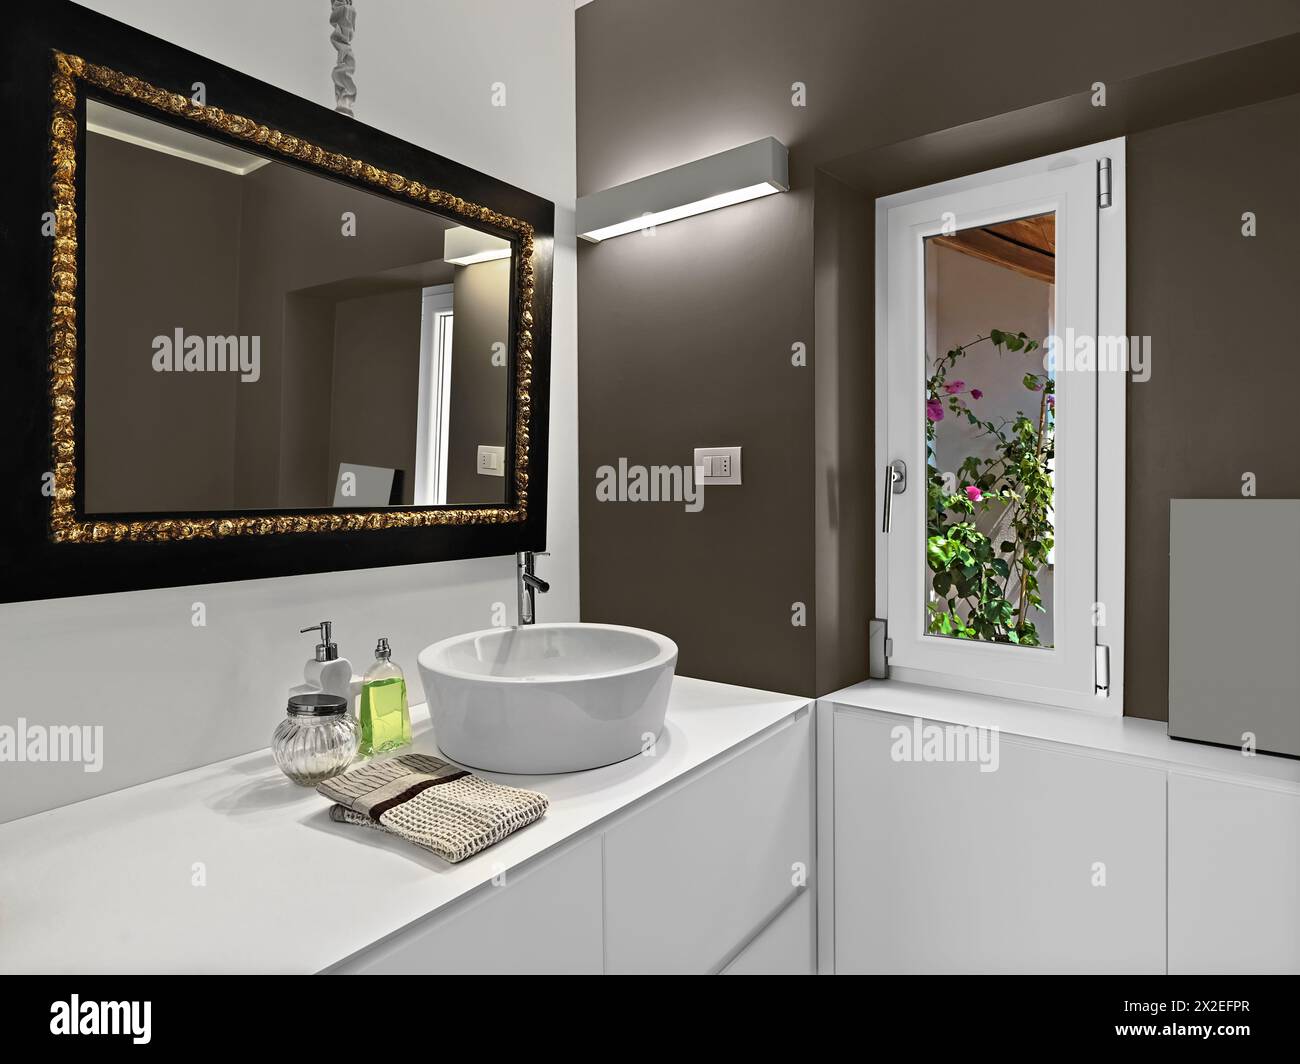 modern bathroom interior with large mirror above the bathroom sink Stock Photo